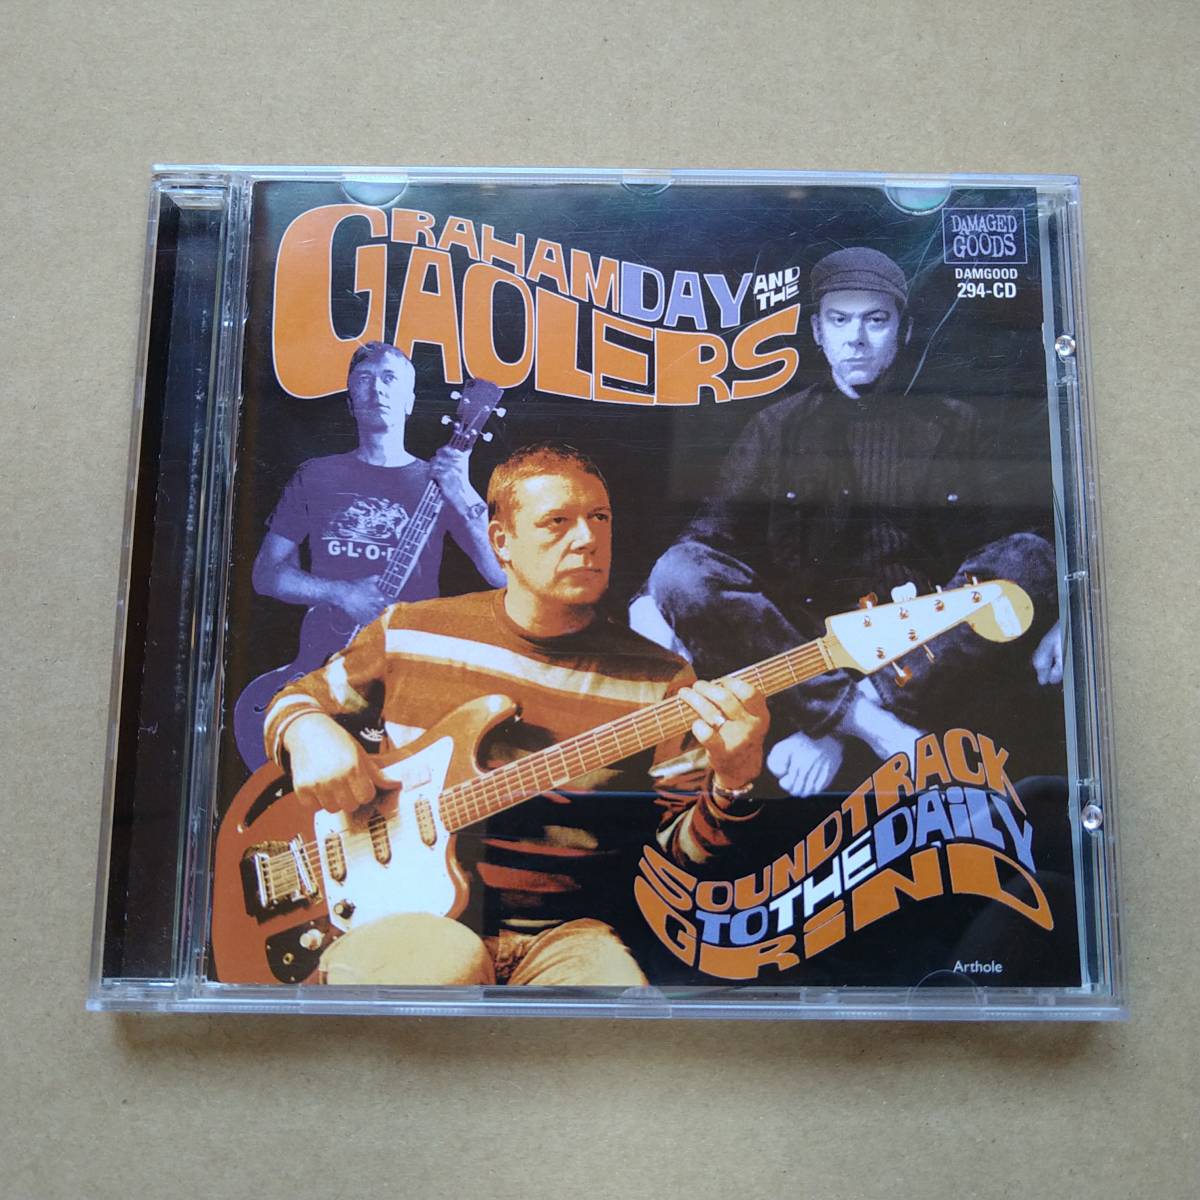 GRAHAM DAY & THE GAOLERS / Soundtrack To The Daily Grind [CD] 2007年 輸入盤 DAMGOOD294-CD ガレージ/ネオモッズ/The Prisoners_画像1